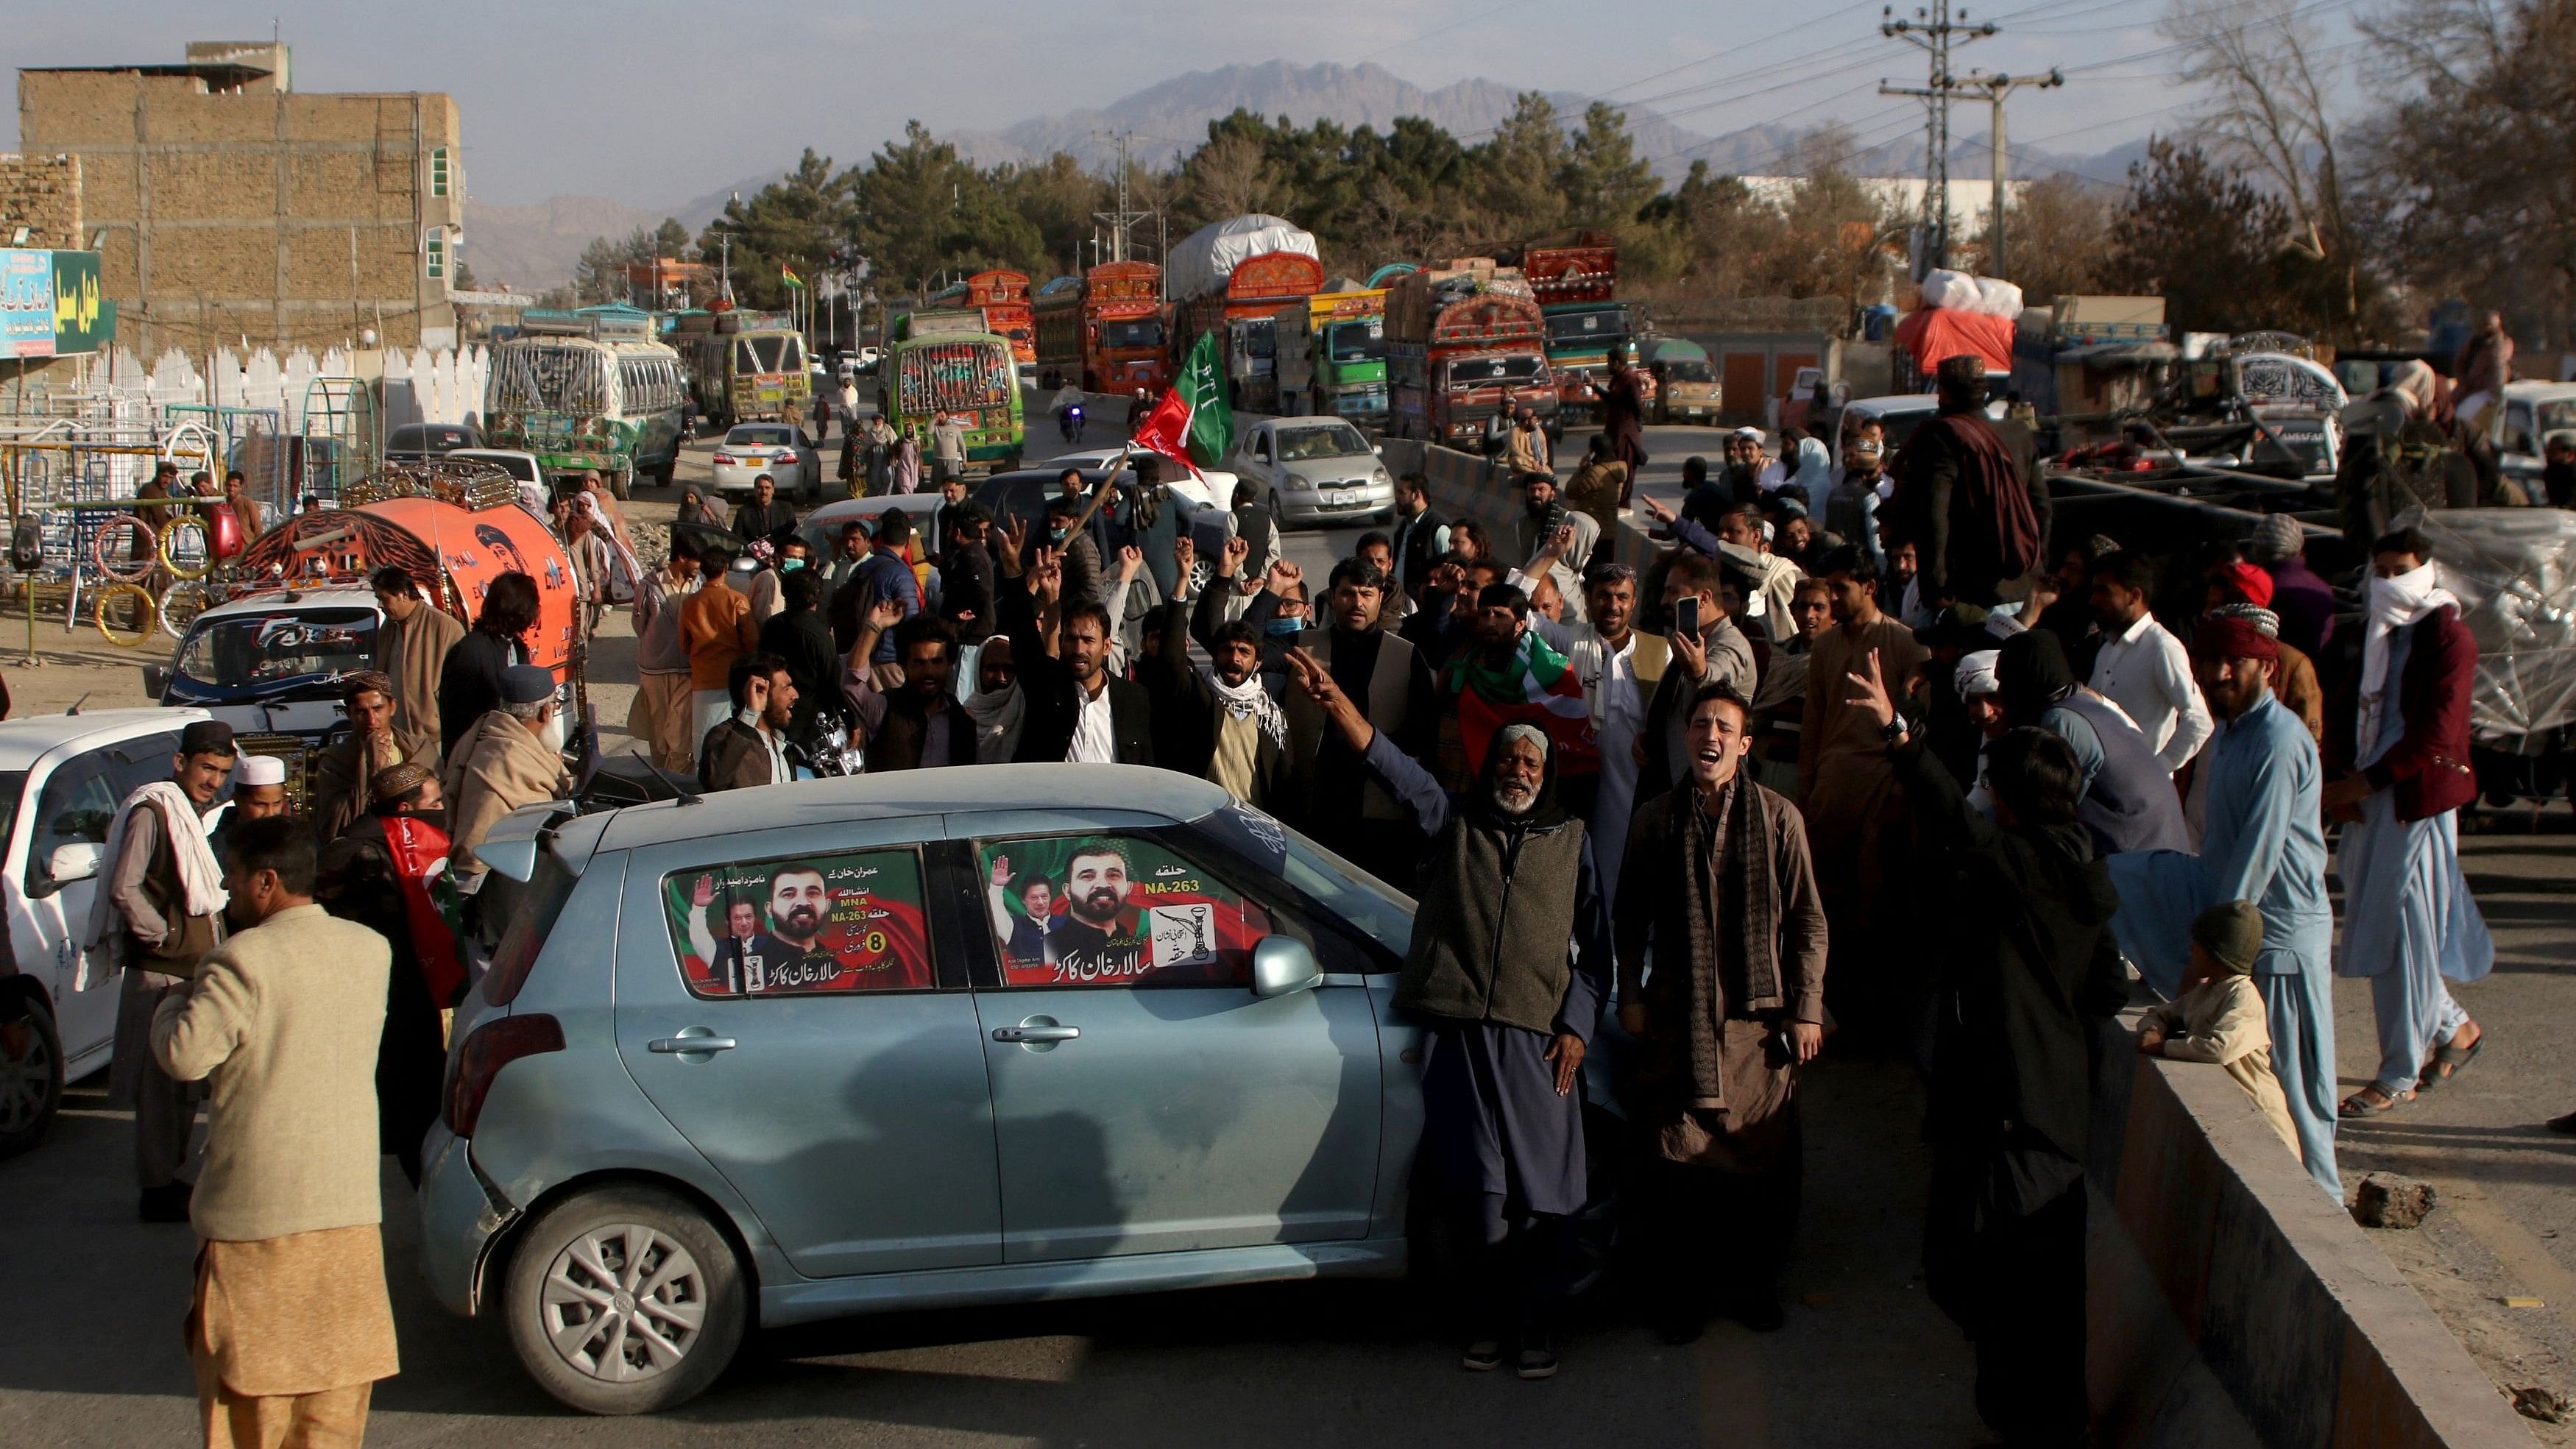 <div class="paragraphs"><p>Voters in Pakistani block a road to protest against the results of the general election, at Baleli, on the outskirts of Quetta, Pakistan.</p></div>